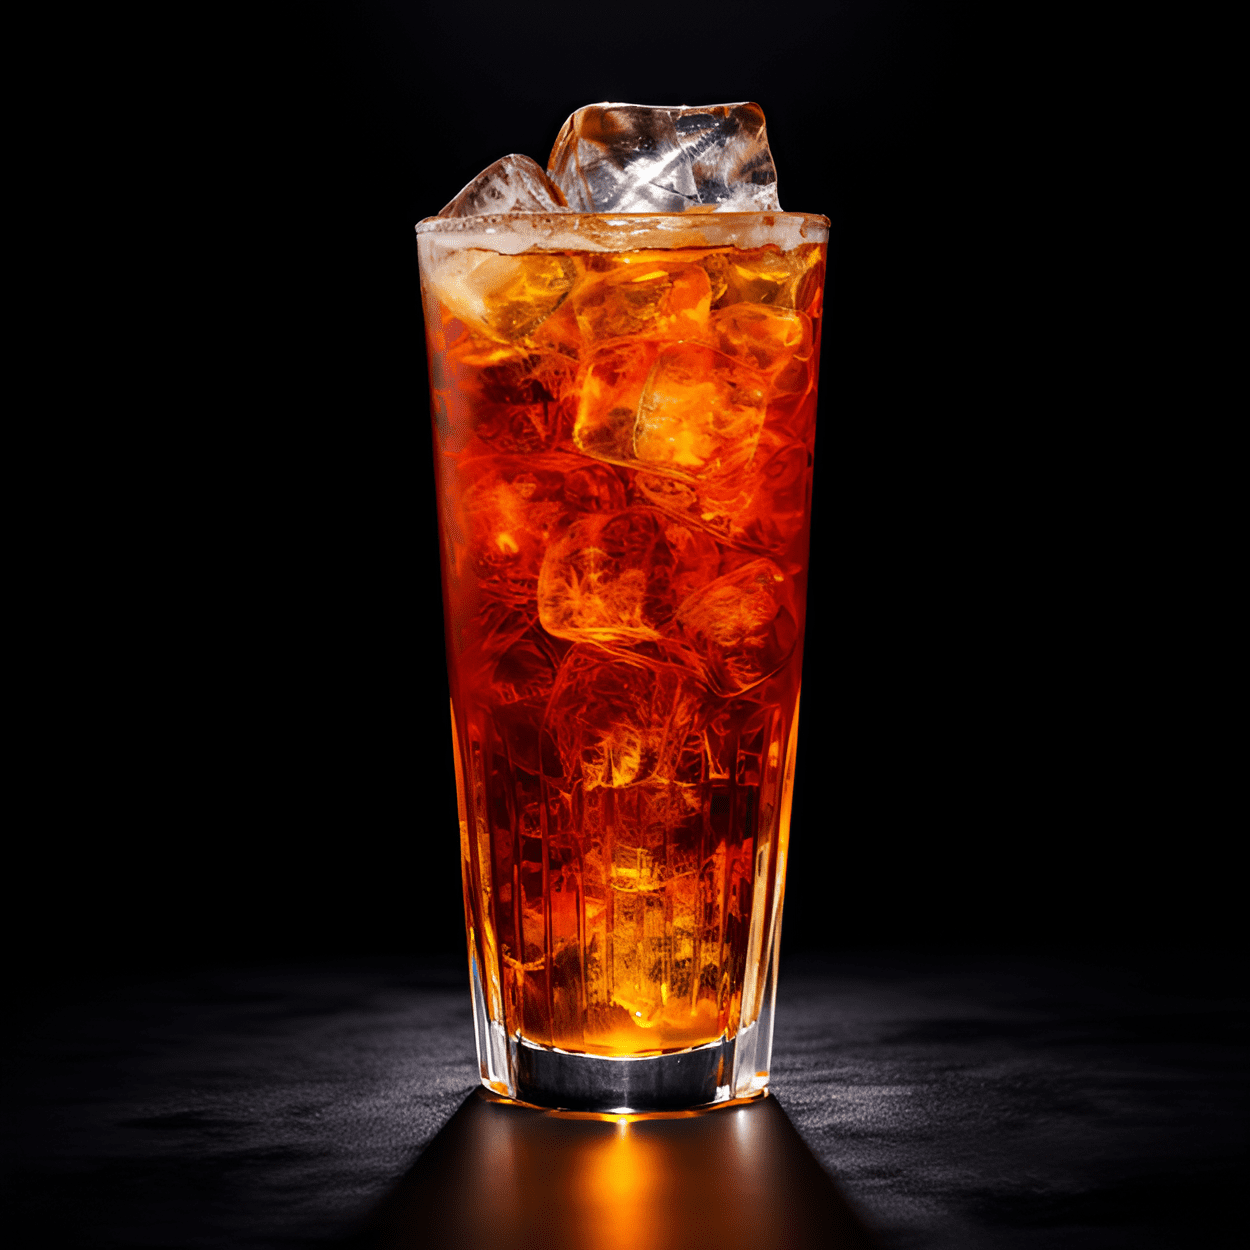 Vodka Red Bull Cocktail Recipe - The Vodka Red Bull has a sweet, fruity taste with a strong, energizing kick from the caffeine. The vodka adds a smooth, clear, and crisp flavor that balances the sweetness of the Red Bull.